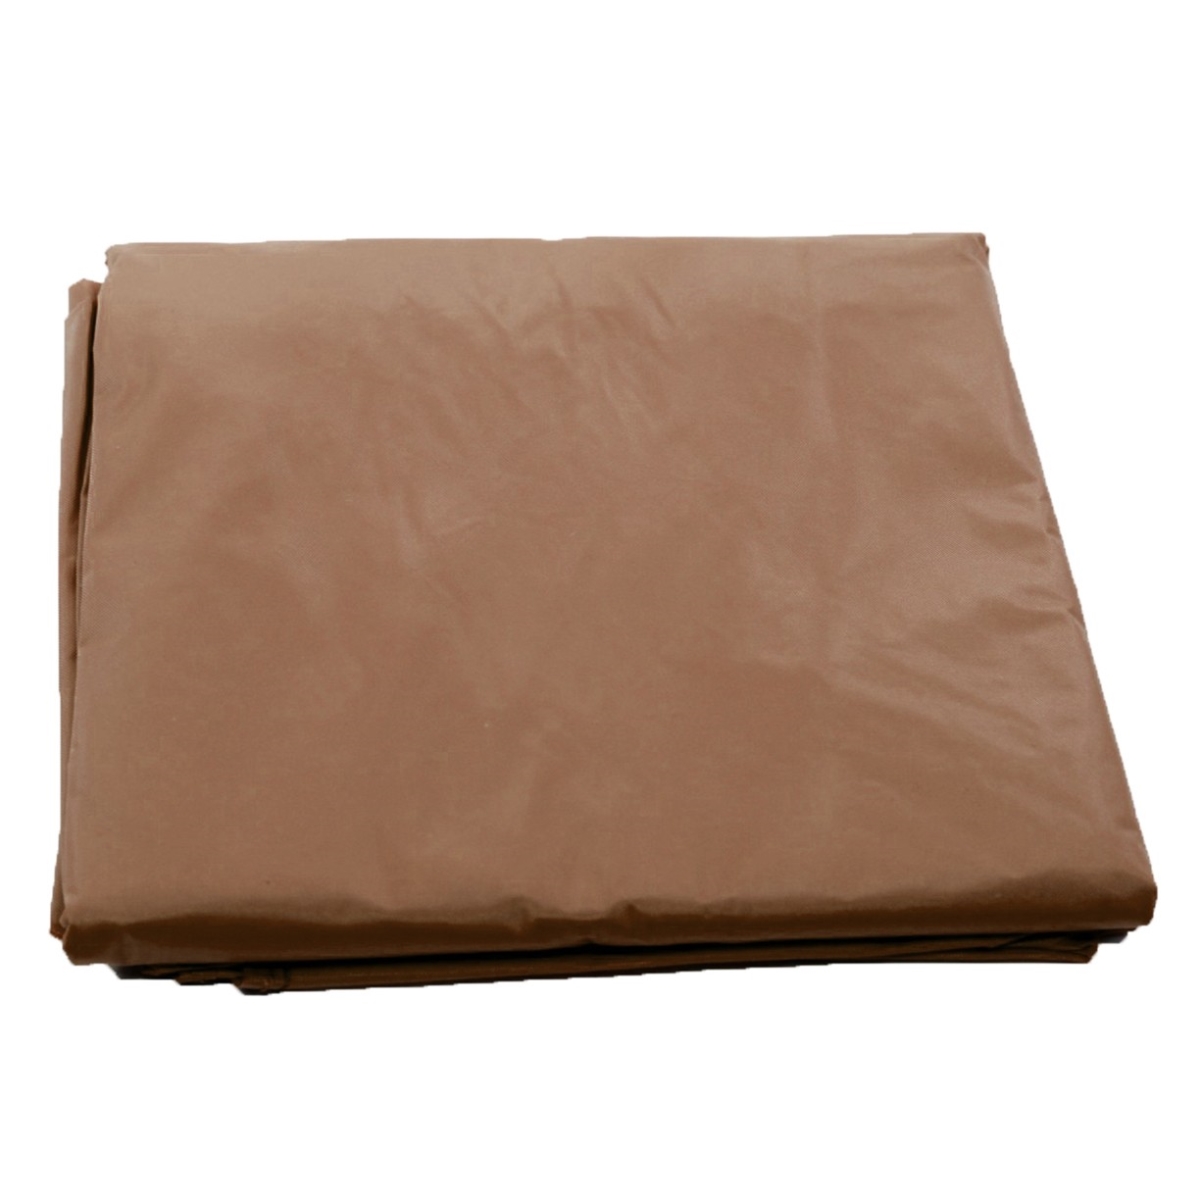 18-149brn 9 Ft. Pool Table Cover, Brown